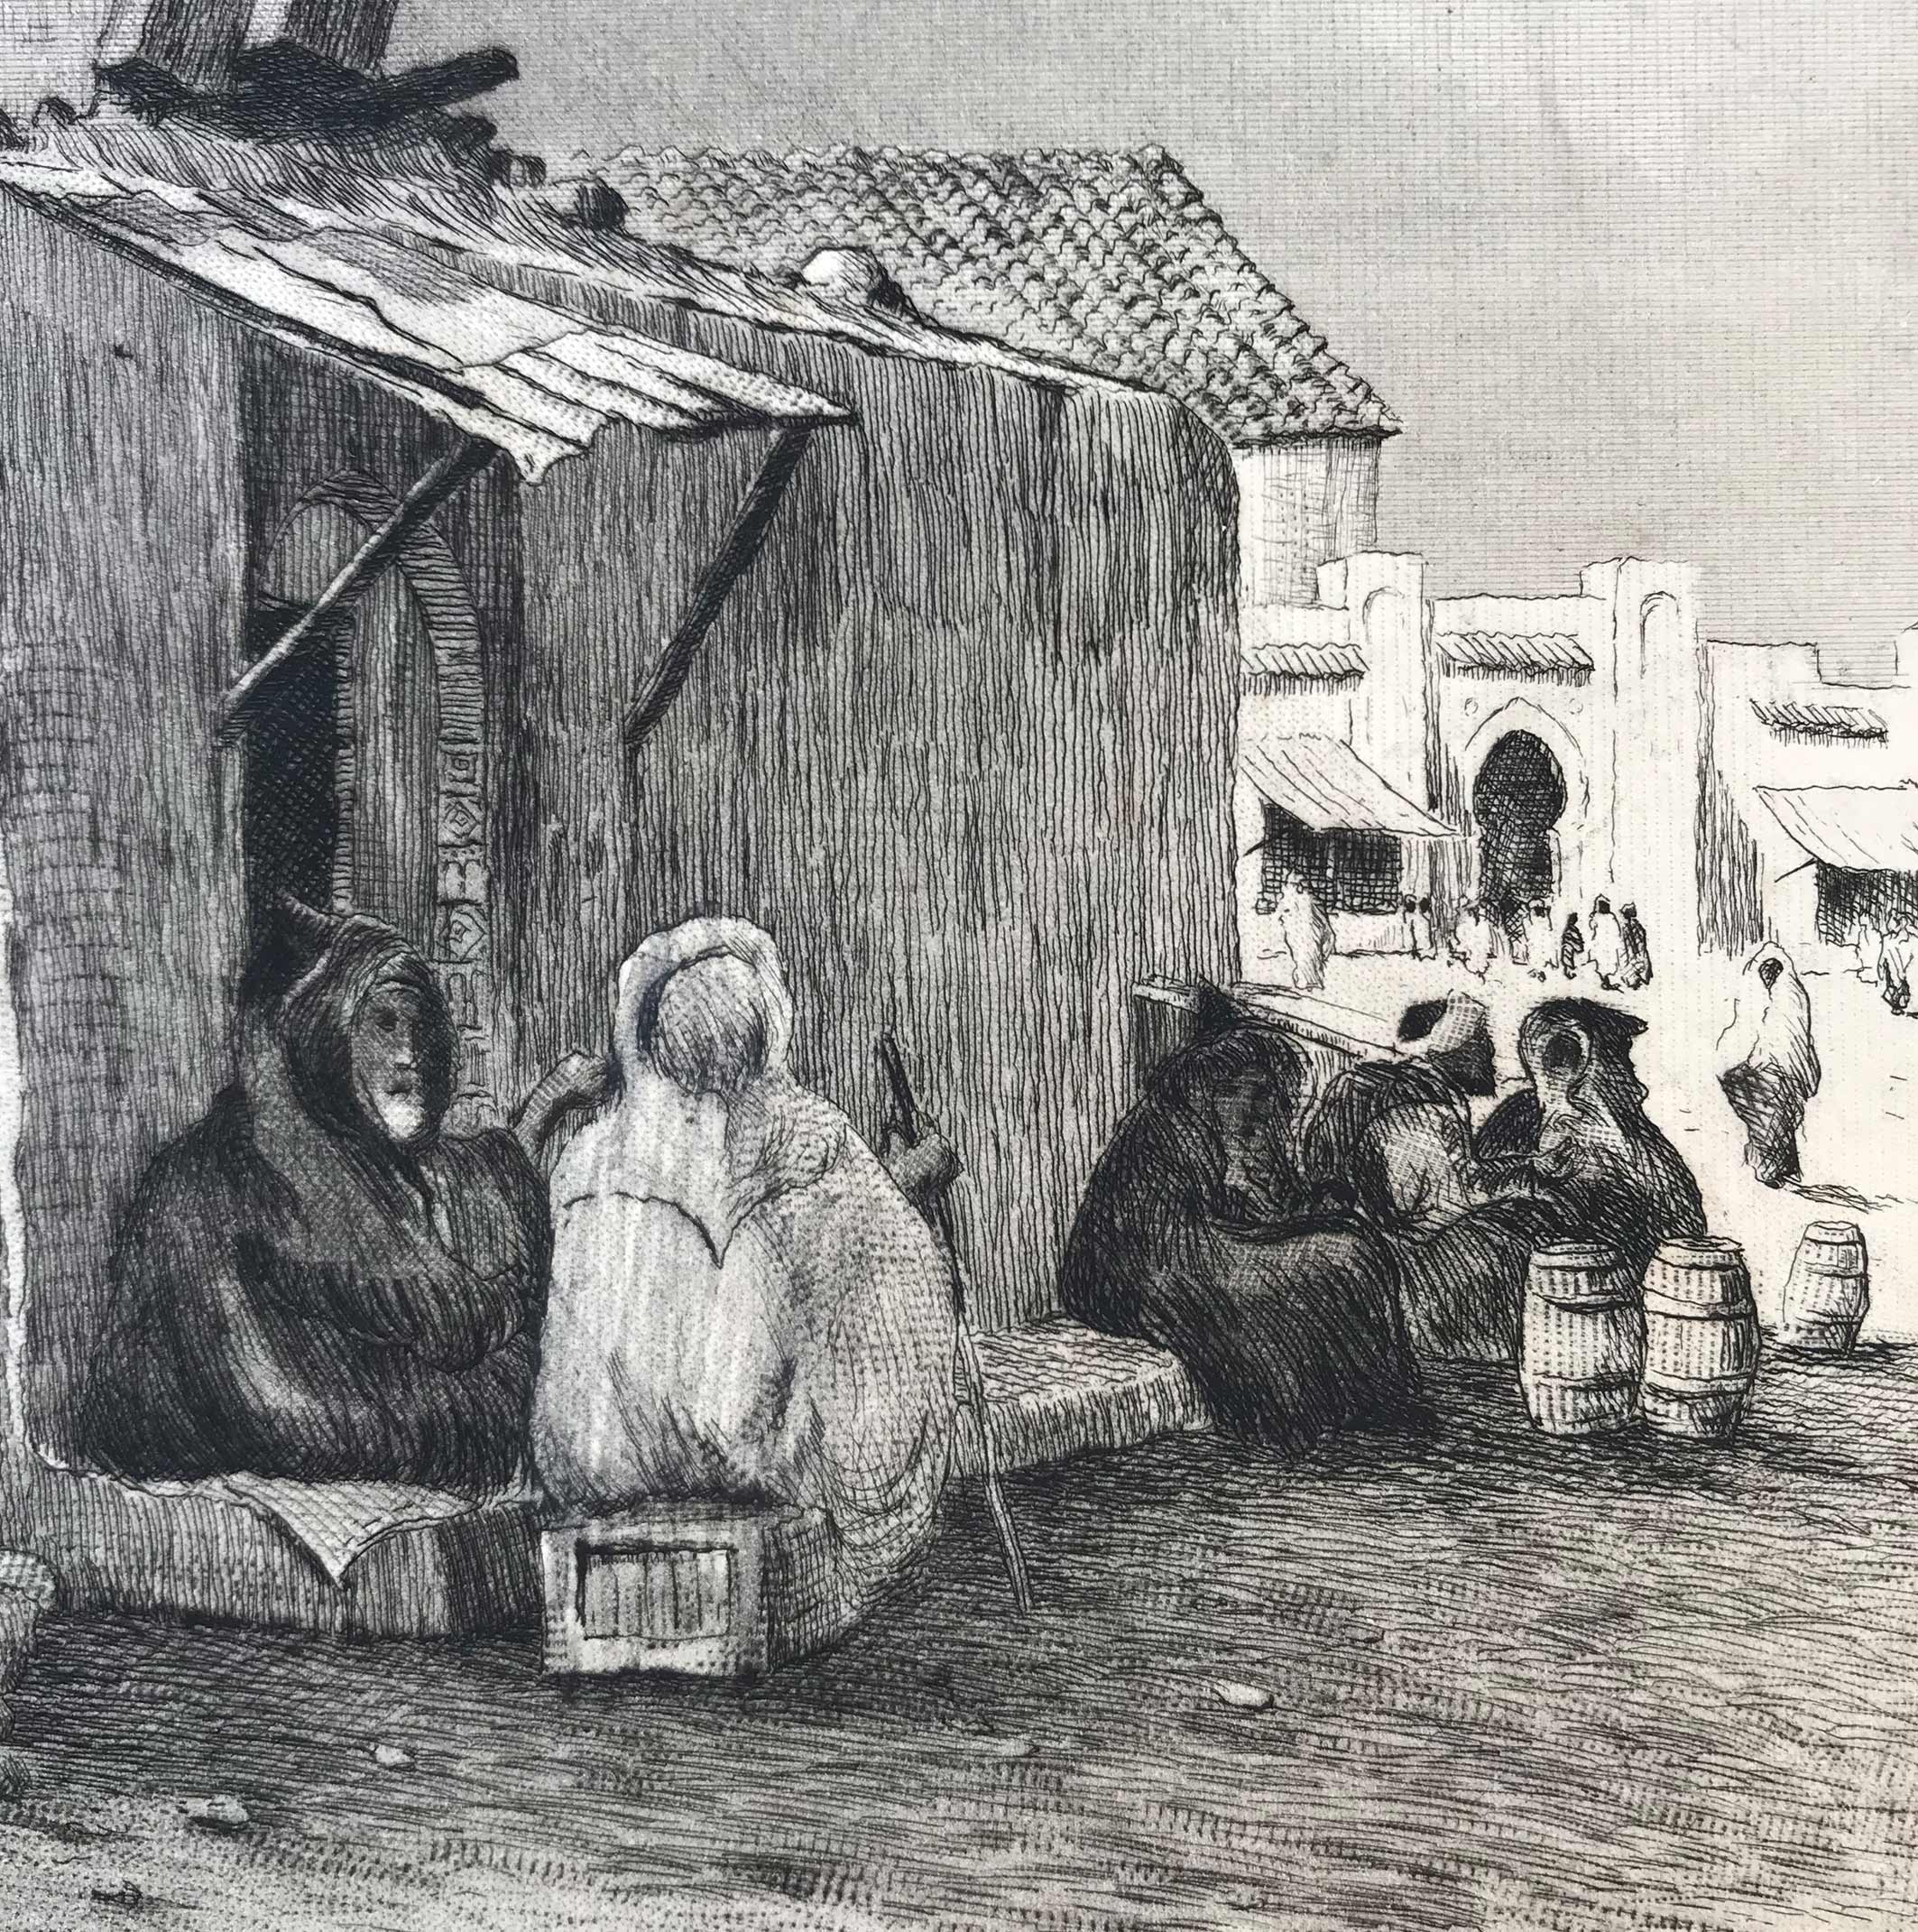 Vintage etched scene of Tangier by Dr D.Donald (1923). Find Antique Etchings & other Antique Prints at IntoVintage.co.uk